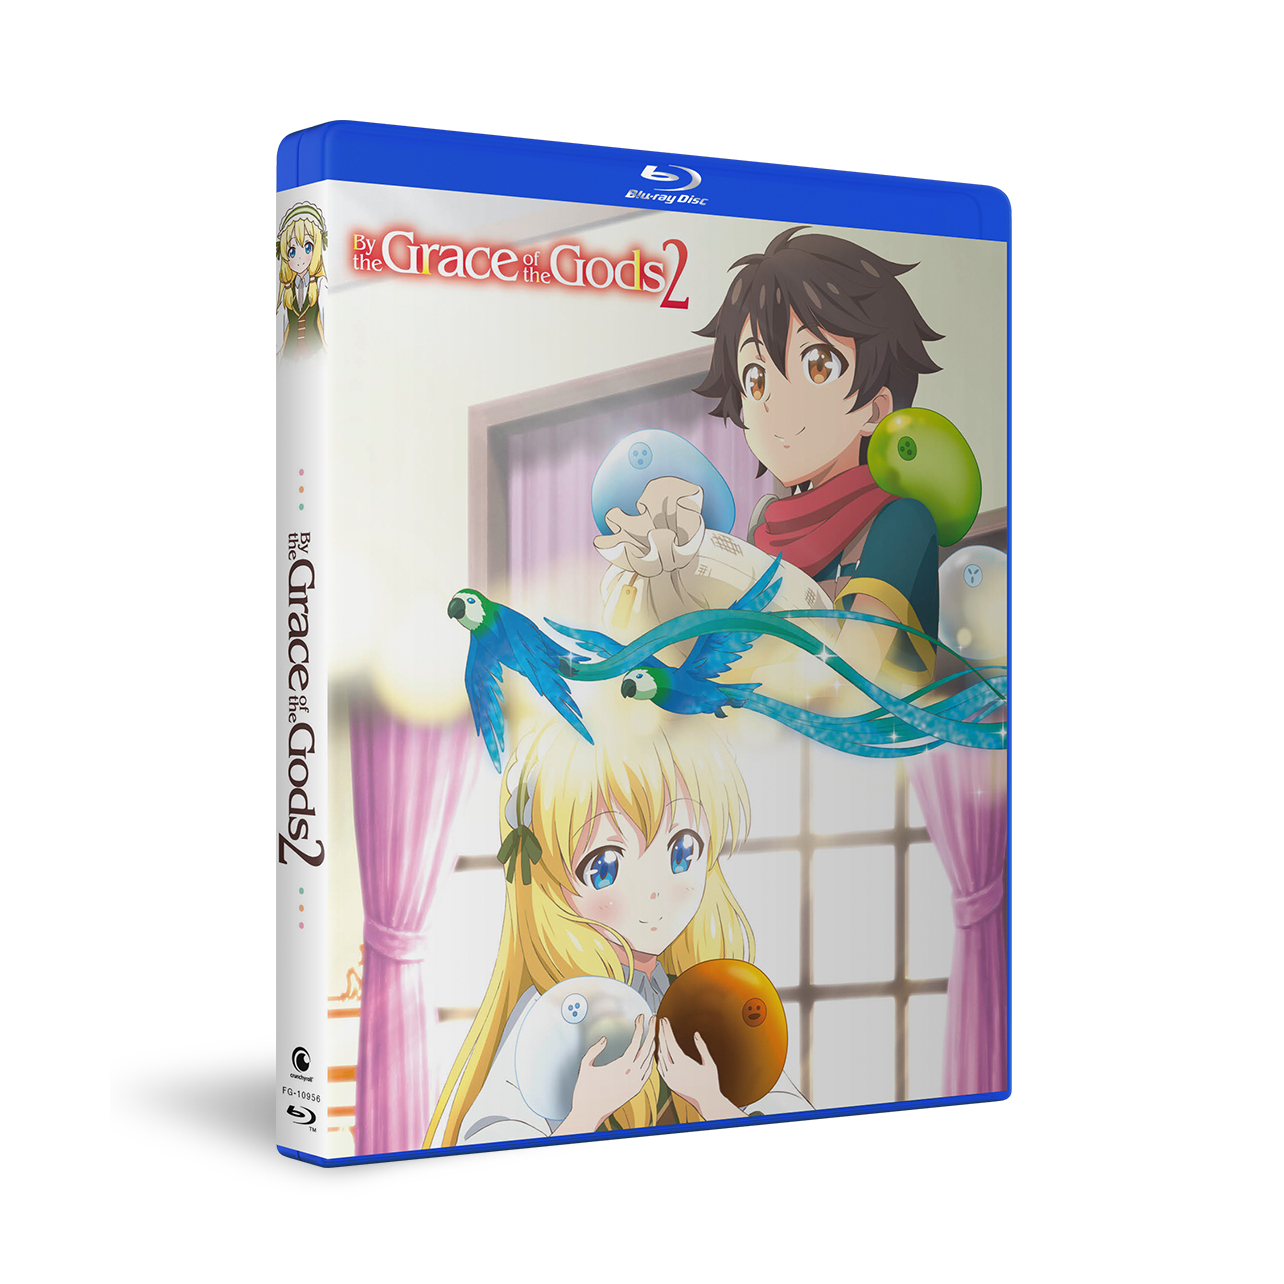 By the Grace of the Gods - Season 2 - Blu-ray image count 1